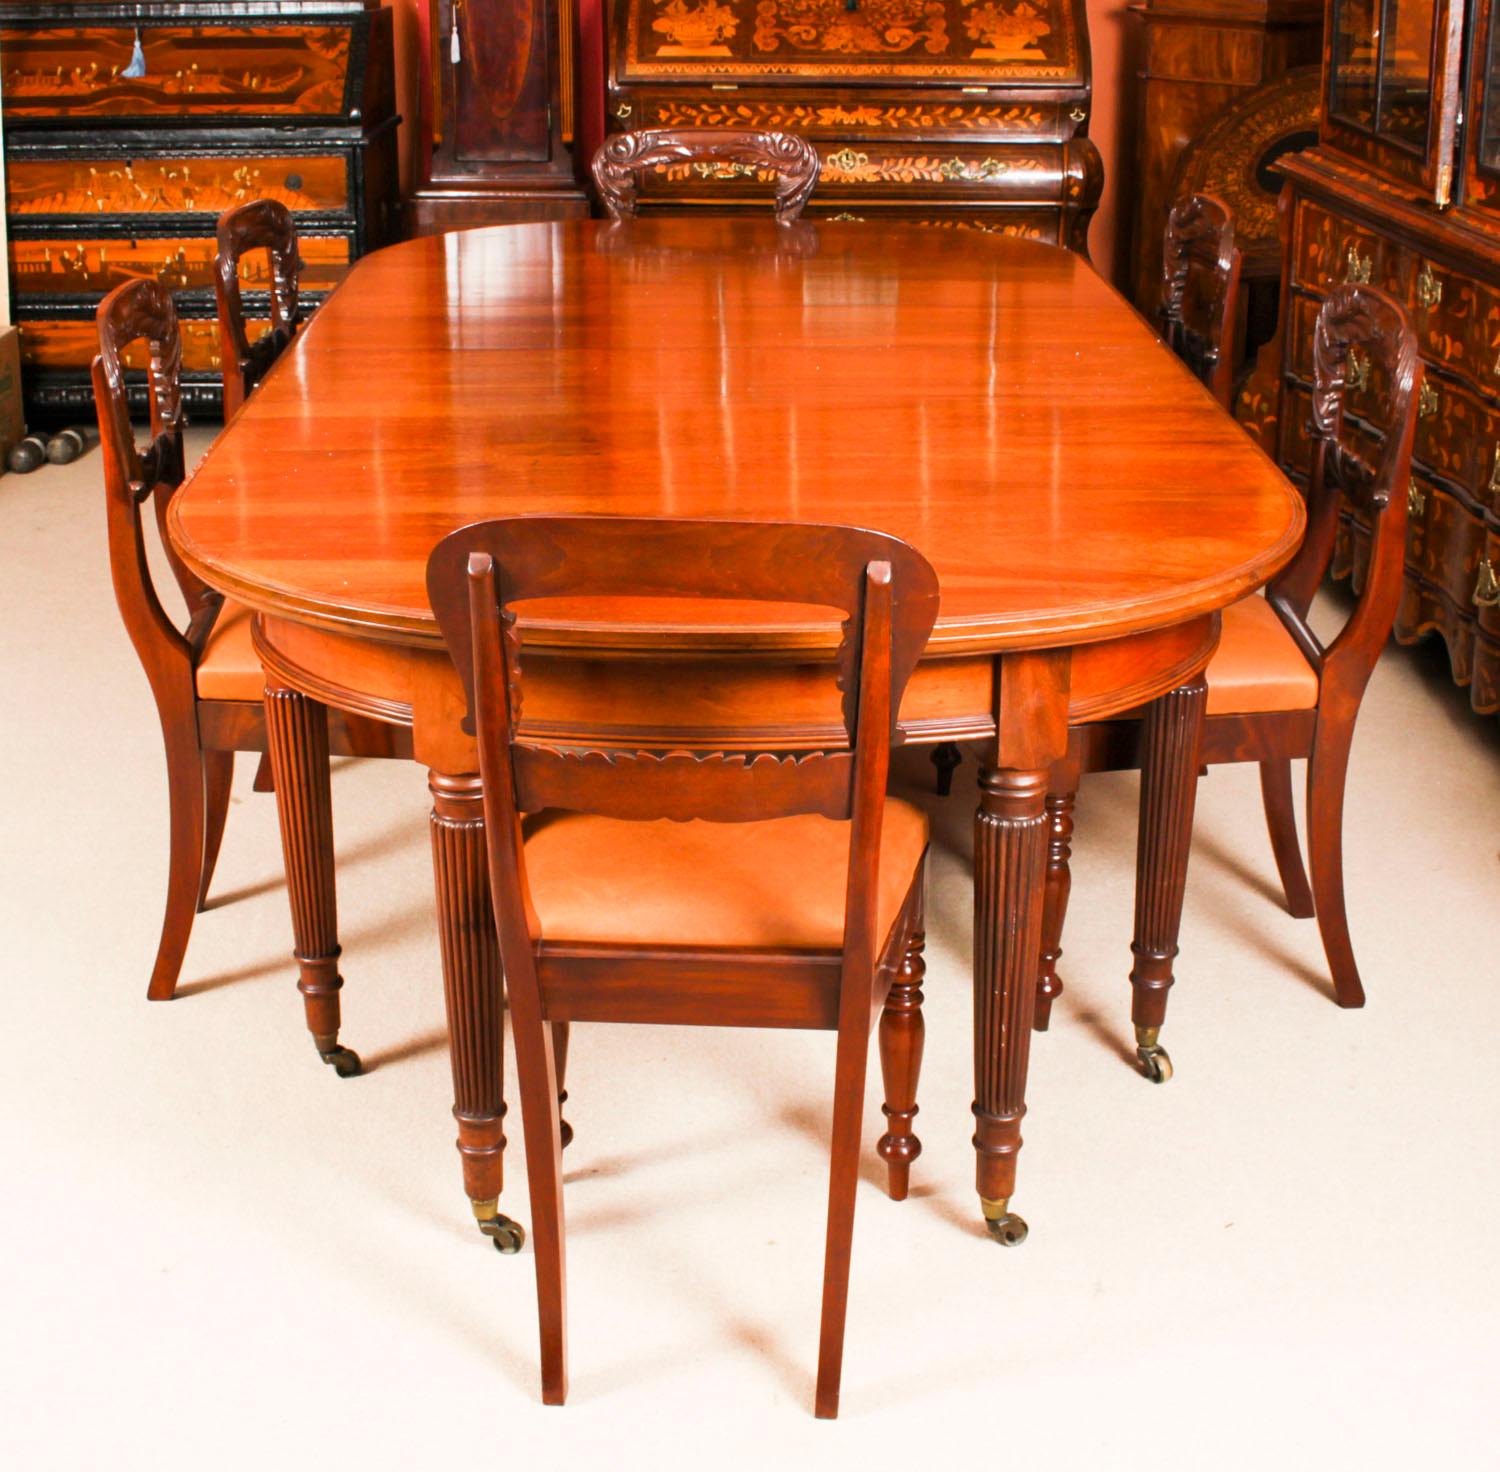 This is a fabulous antique 19th century dining suite comprising a Victorian oval flame mahogany extending dining table, circa 1880 in date and a set of six antique William IV dining chairs Circa 1830 in date.

The table has two original leaves and